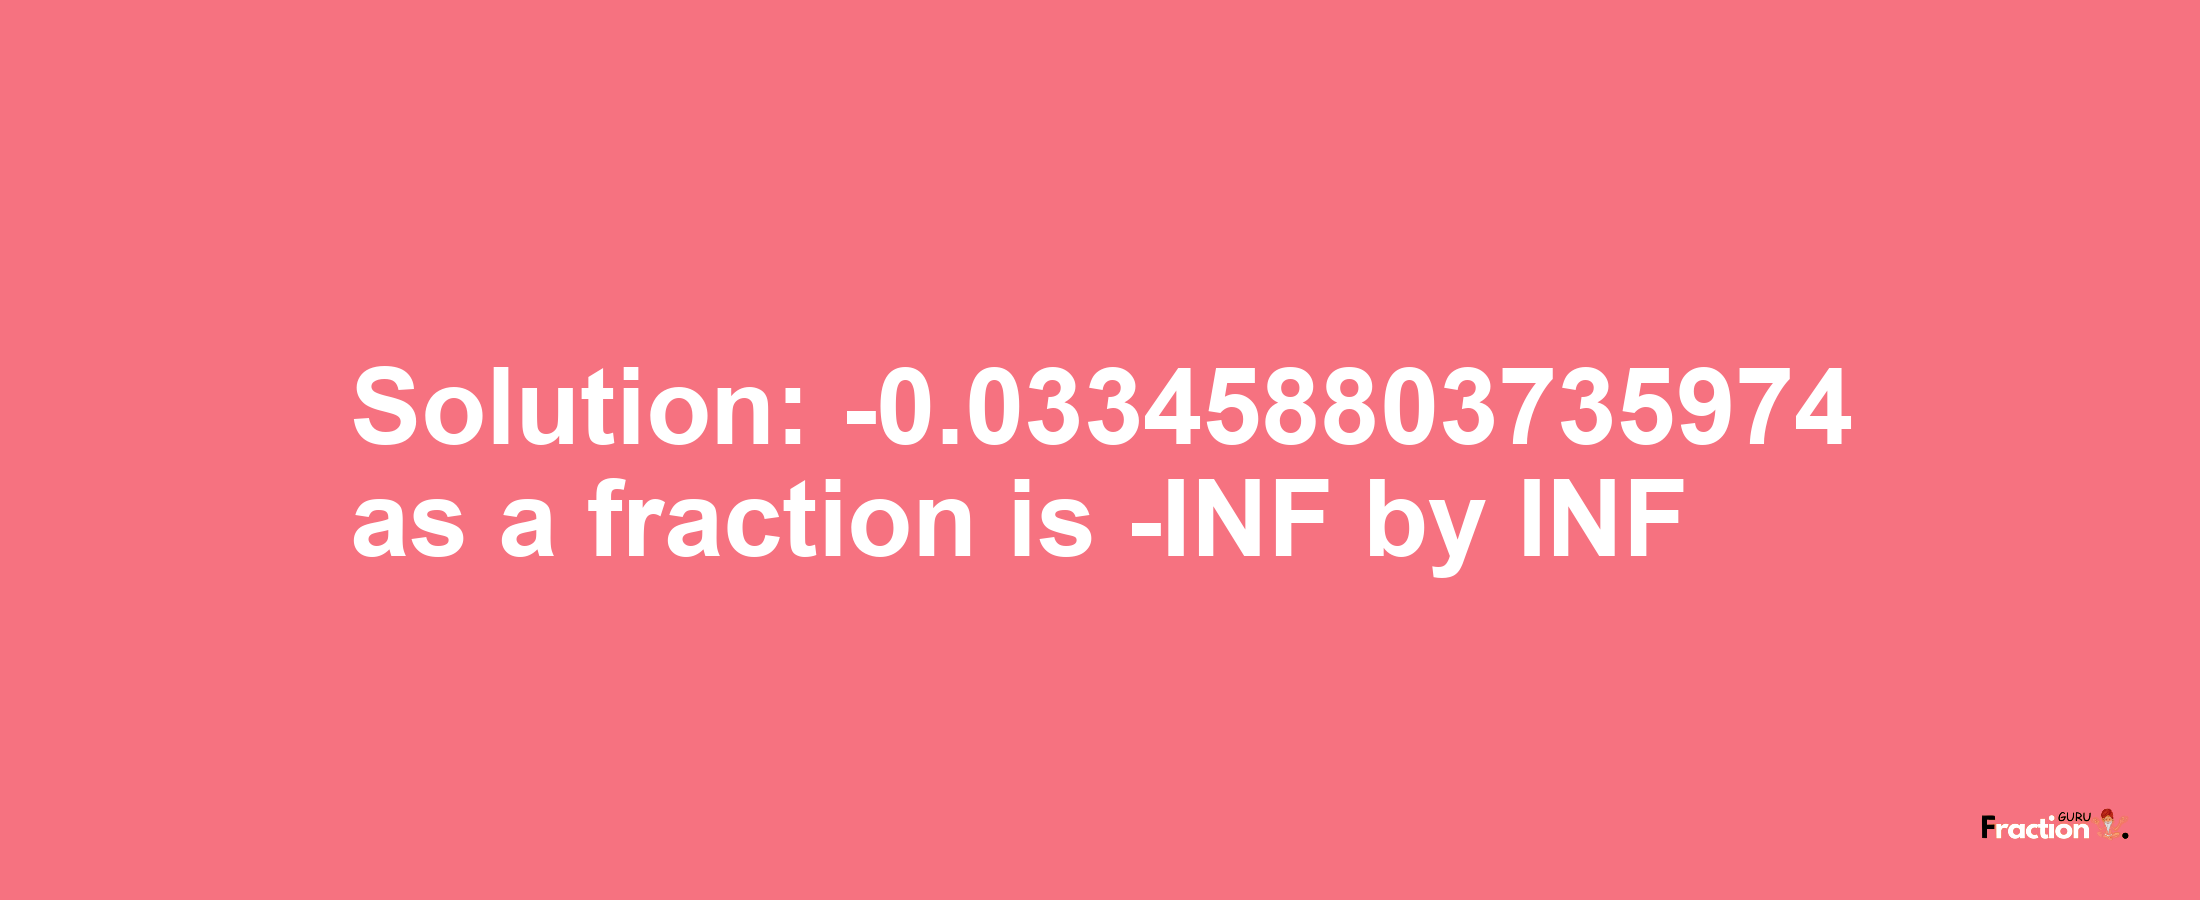 Solution:-0.033458803735974 as a fraction is -INF/INF